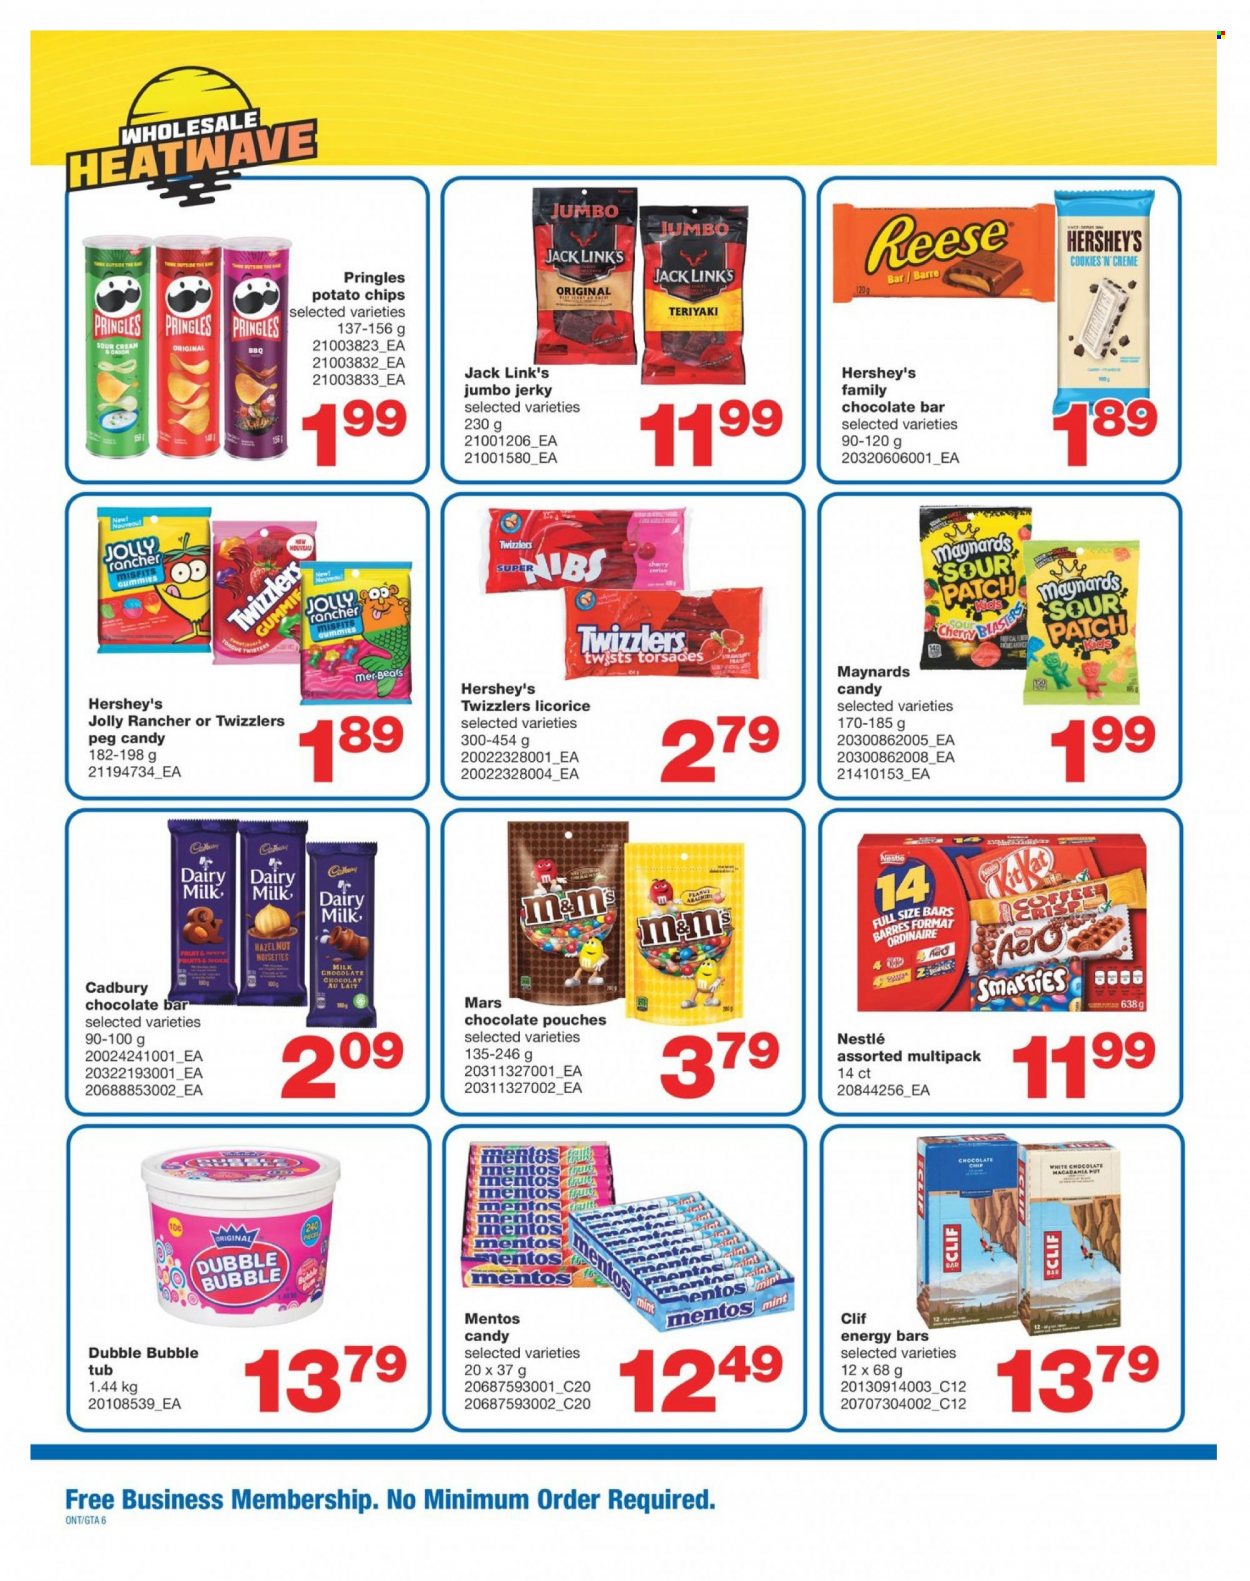 thumbnail - Wholesale Club Flyer - April 28, 2022 - July 06, 2022 - Sales products - onion, cherries, cod, jerky, Hershey's, cookies, white chocolate, Mentos, Mars, Cadbury, Dairy Milk, sour patch, chocolate bar, potato chips, Pringles, chips, Jack Link's, energy bar, Nestlé. Page 6.